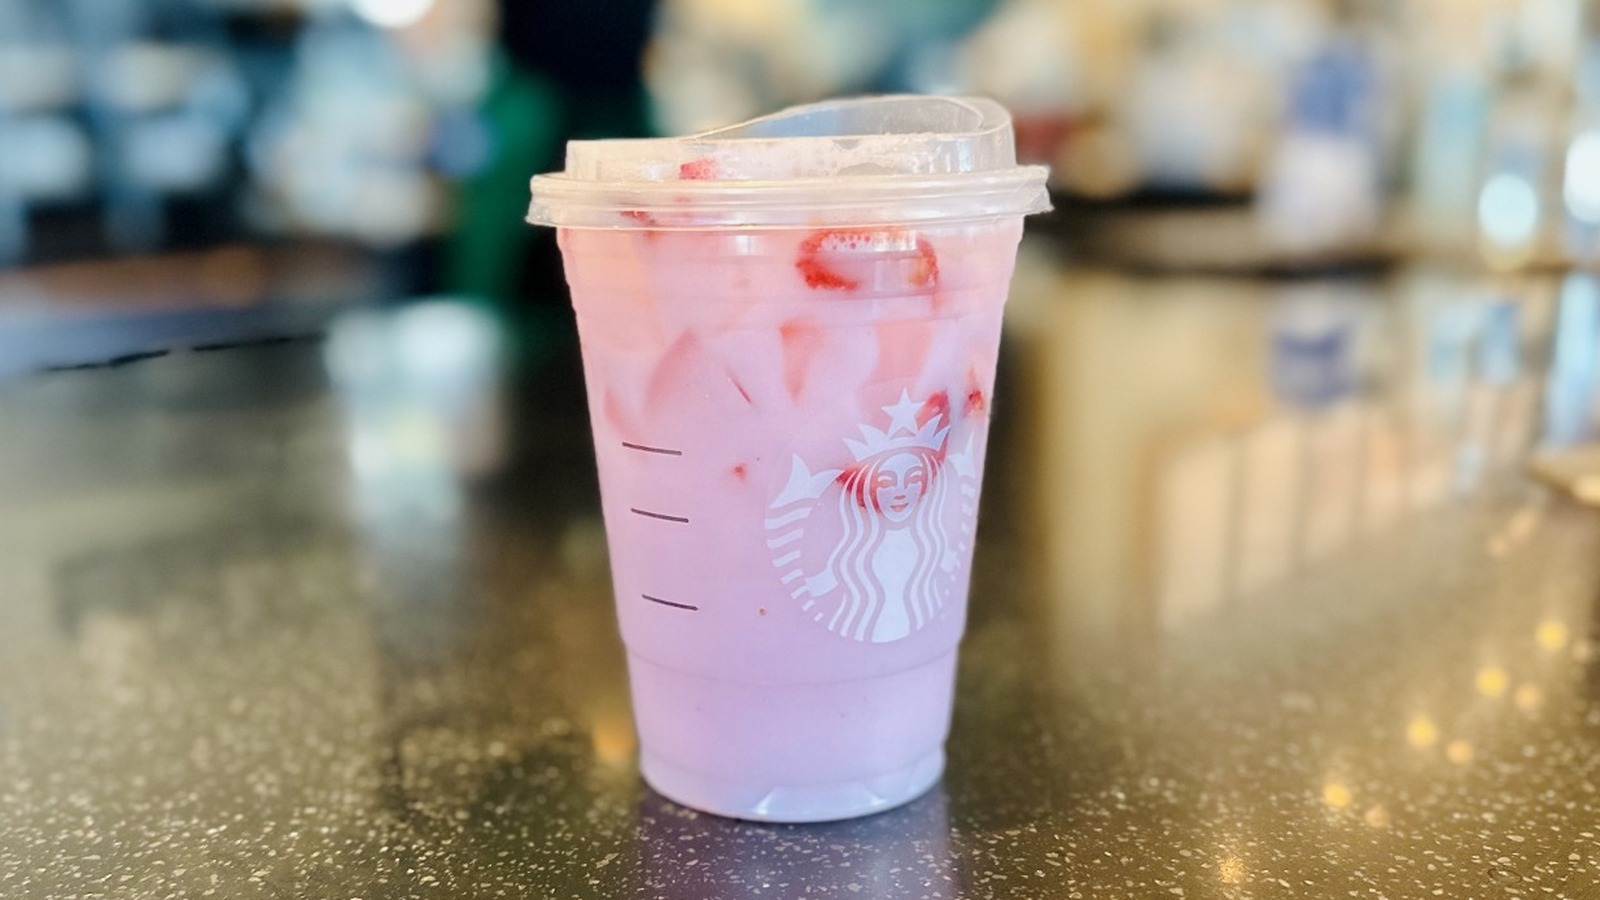 https://www.tastingtable.com/img/gallery/12-facts-you-need-to-know-about-the-starbucks-pink-drink/l-intro-1685646204.jpg